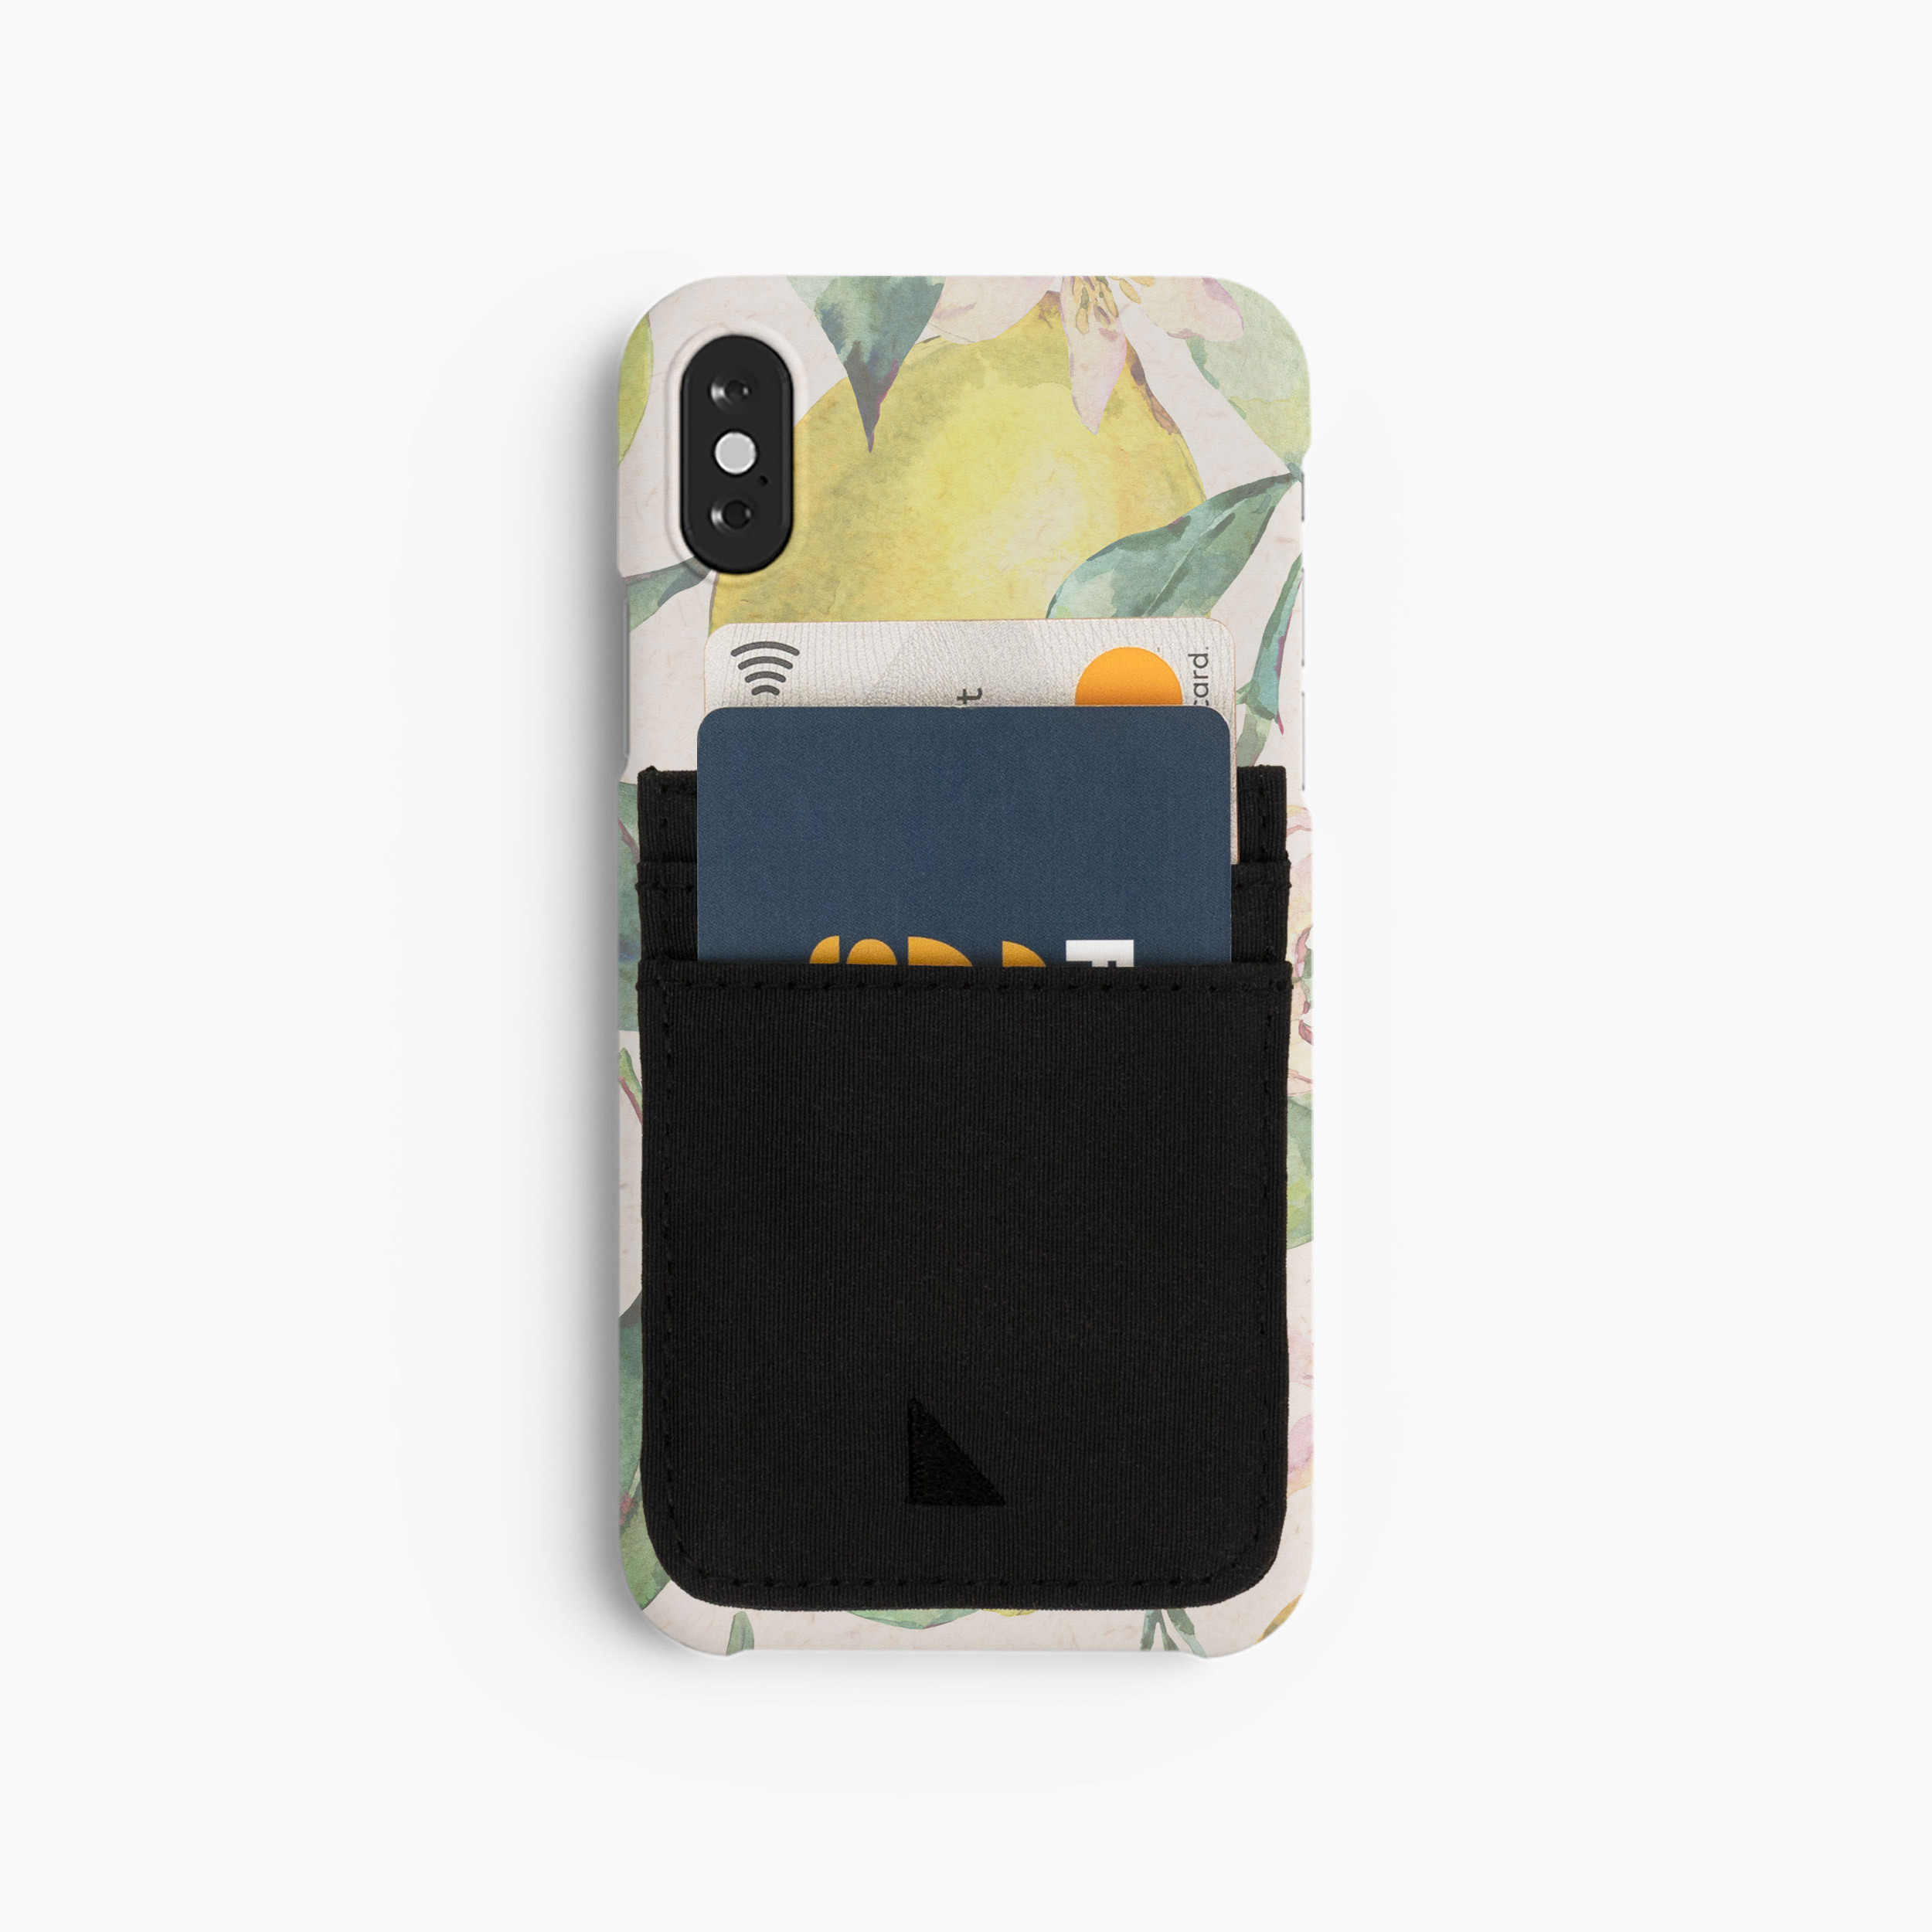 A Good Attachable Phone Wallet